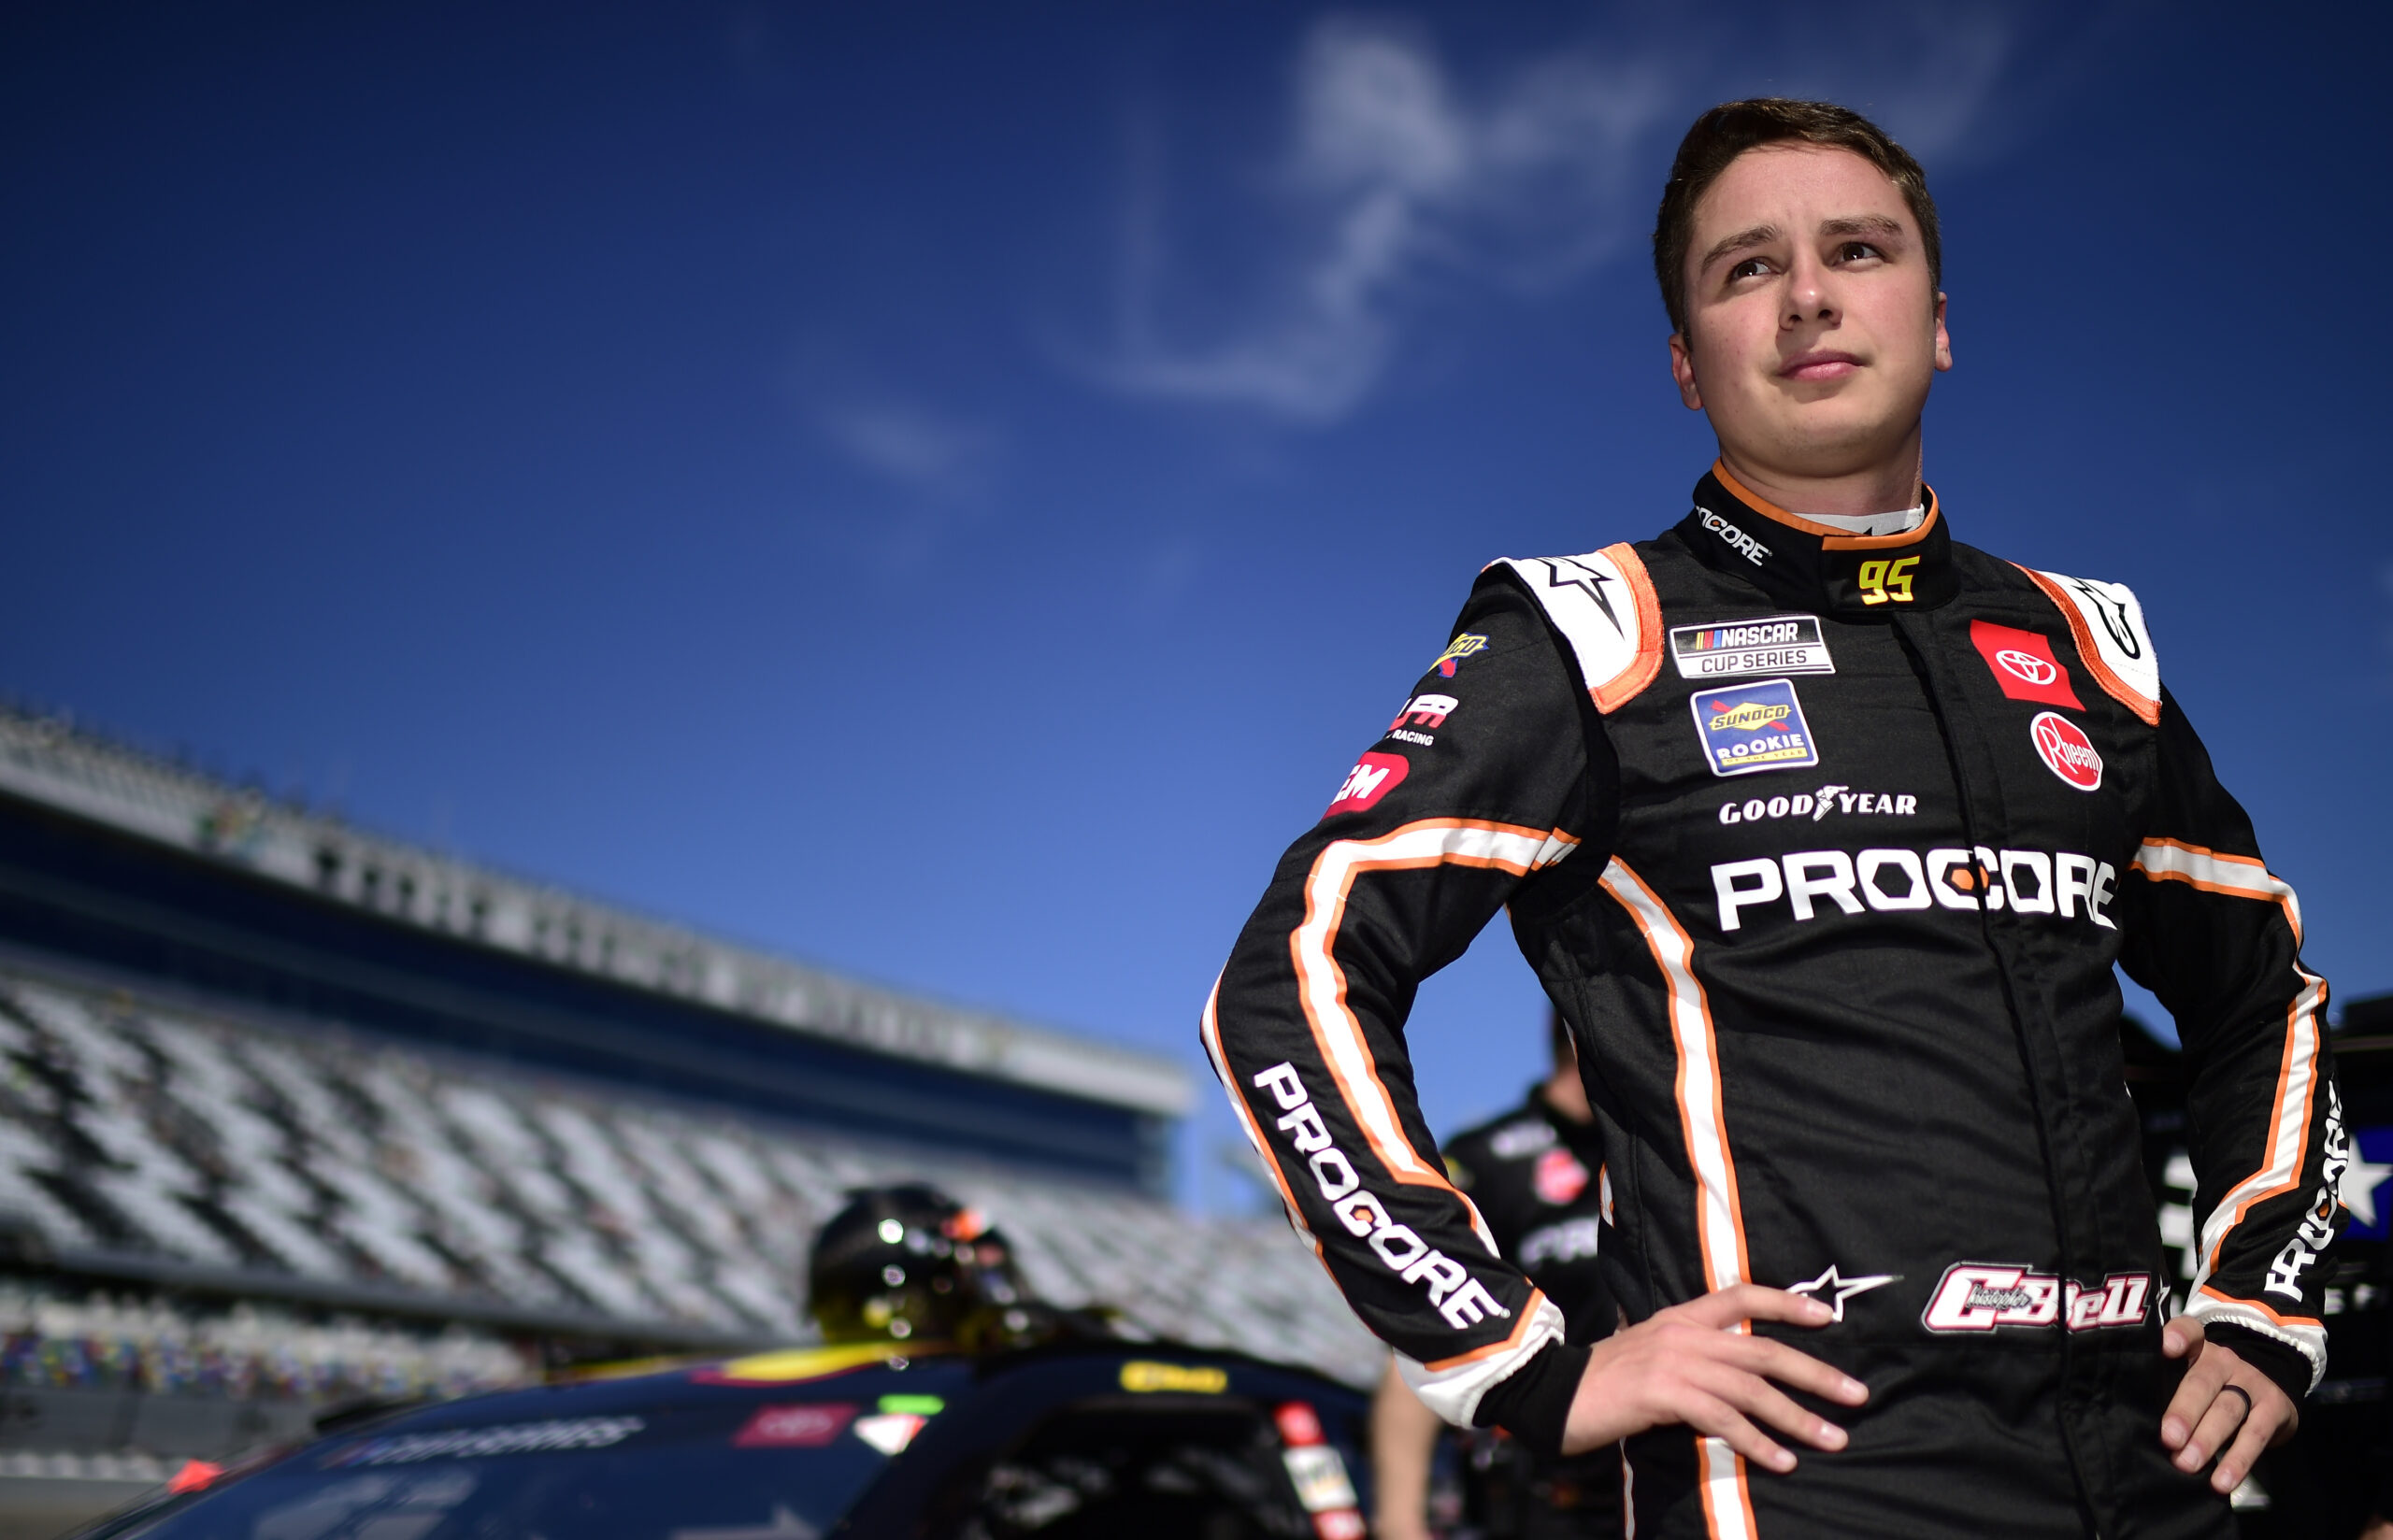 Certainly, Christopher Bell seems set on a strong rookie campaign in 2020. (Photo Credit: Jared C. Tilton/Getty Images)